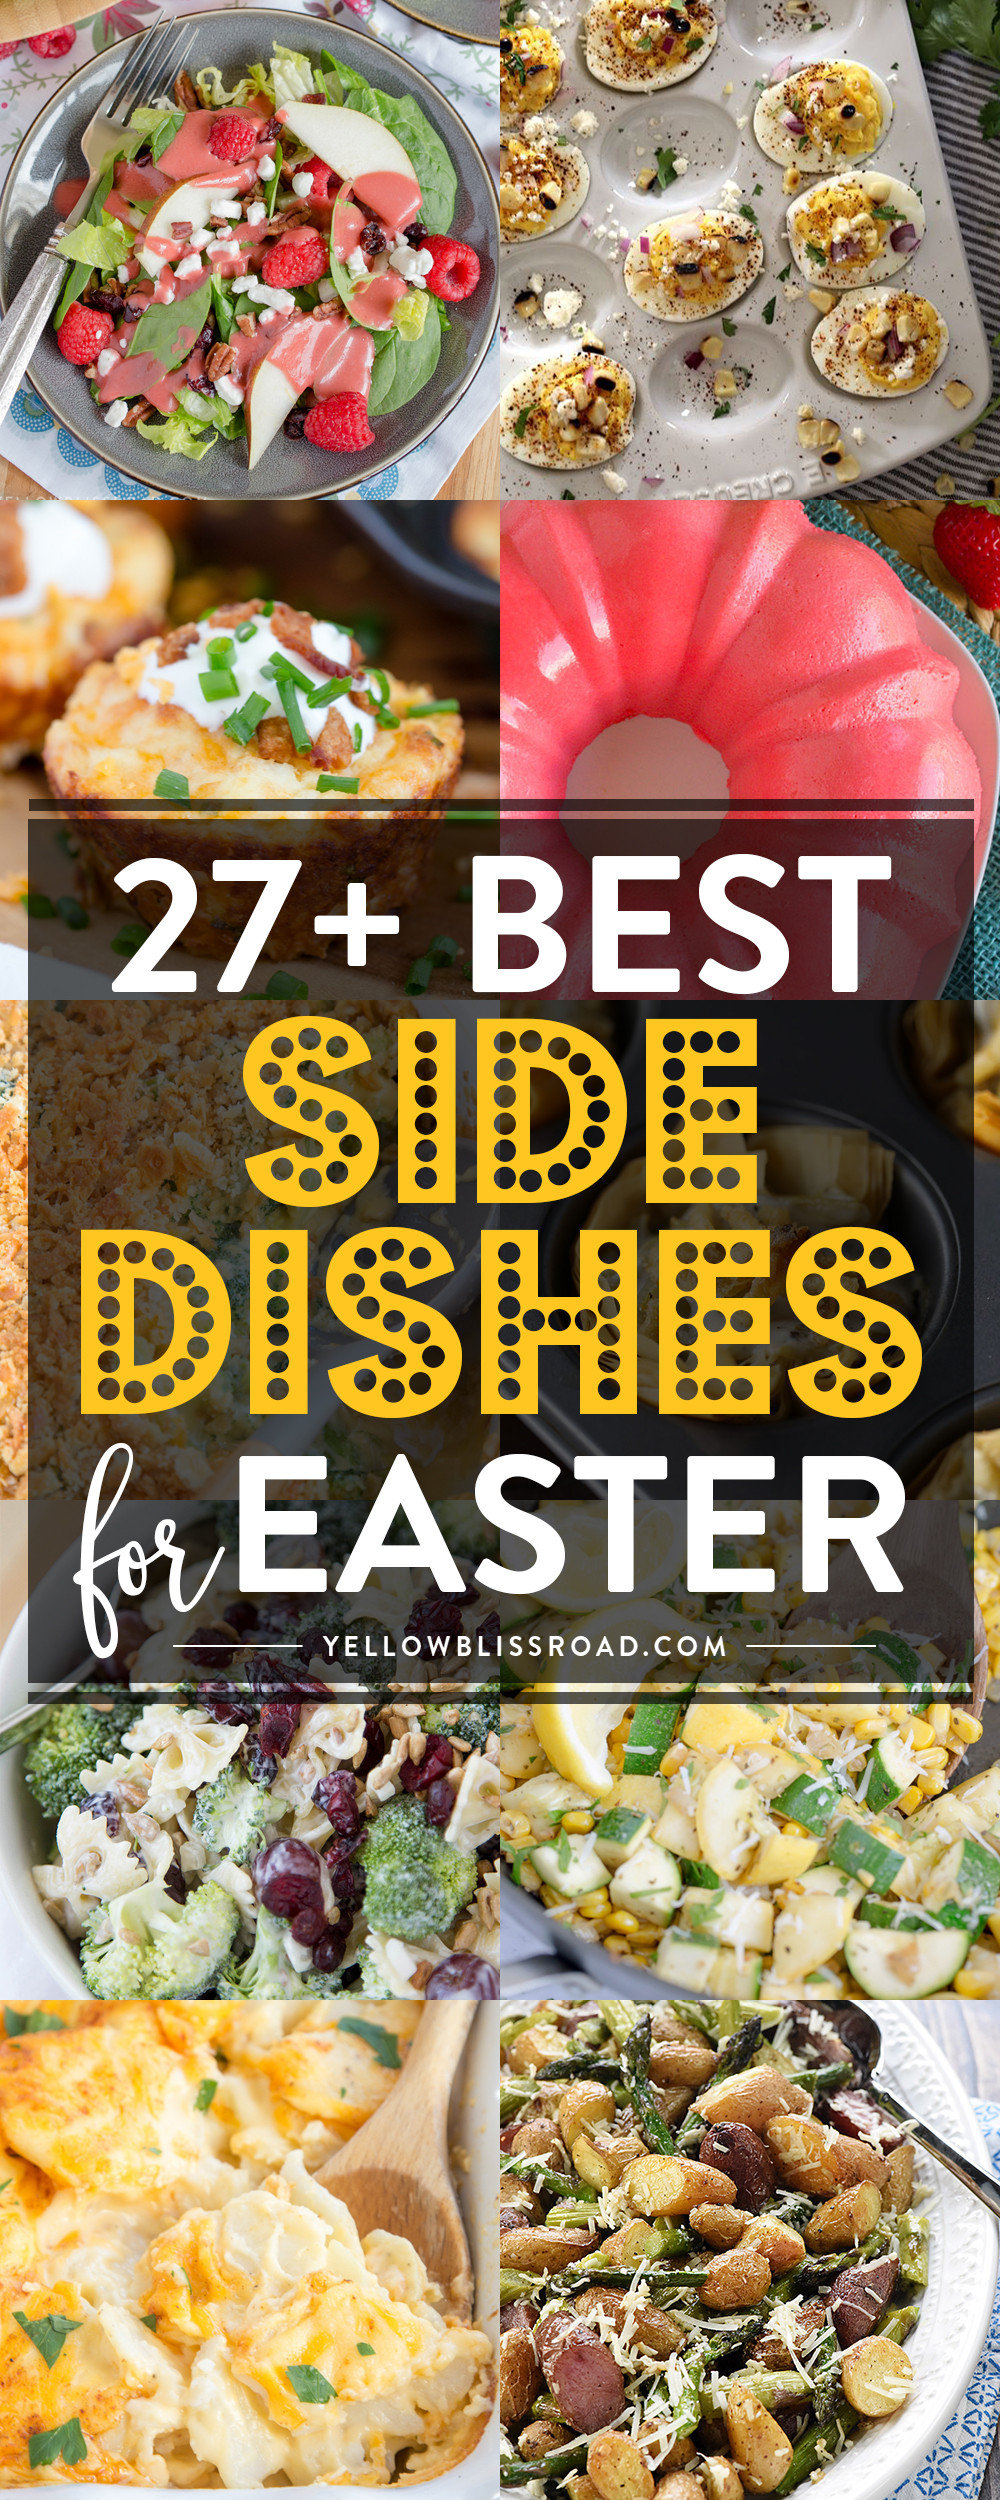 Side Dishes Easter
 Easter Side Dishes More than 50 of the Best Sides for